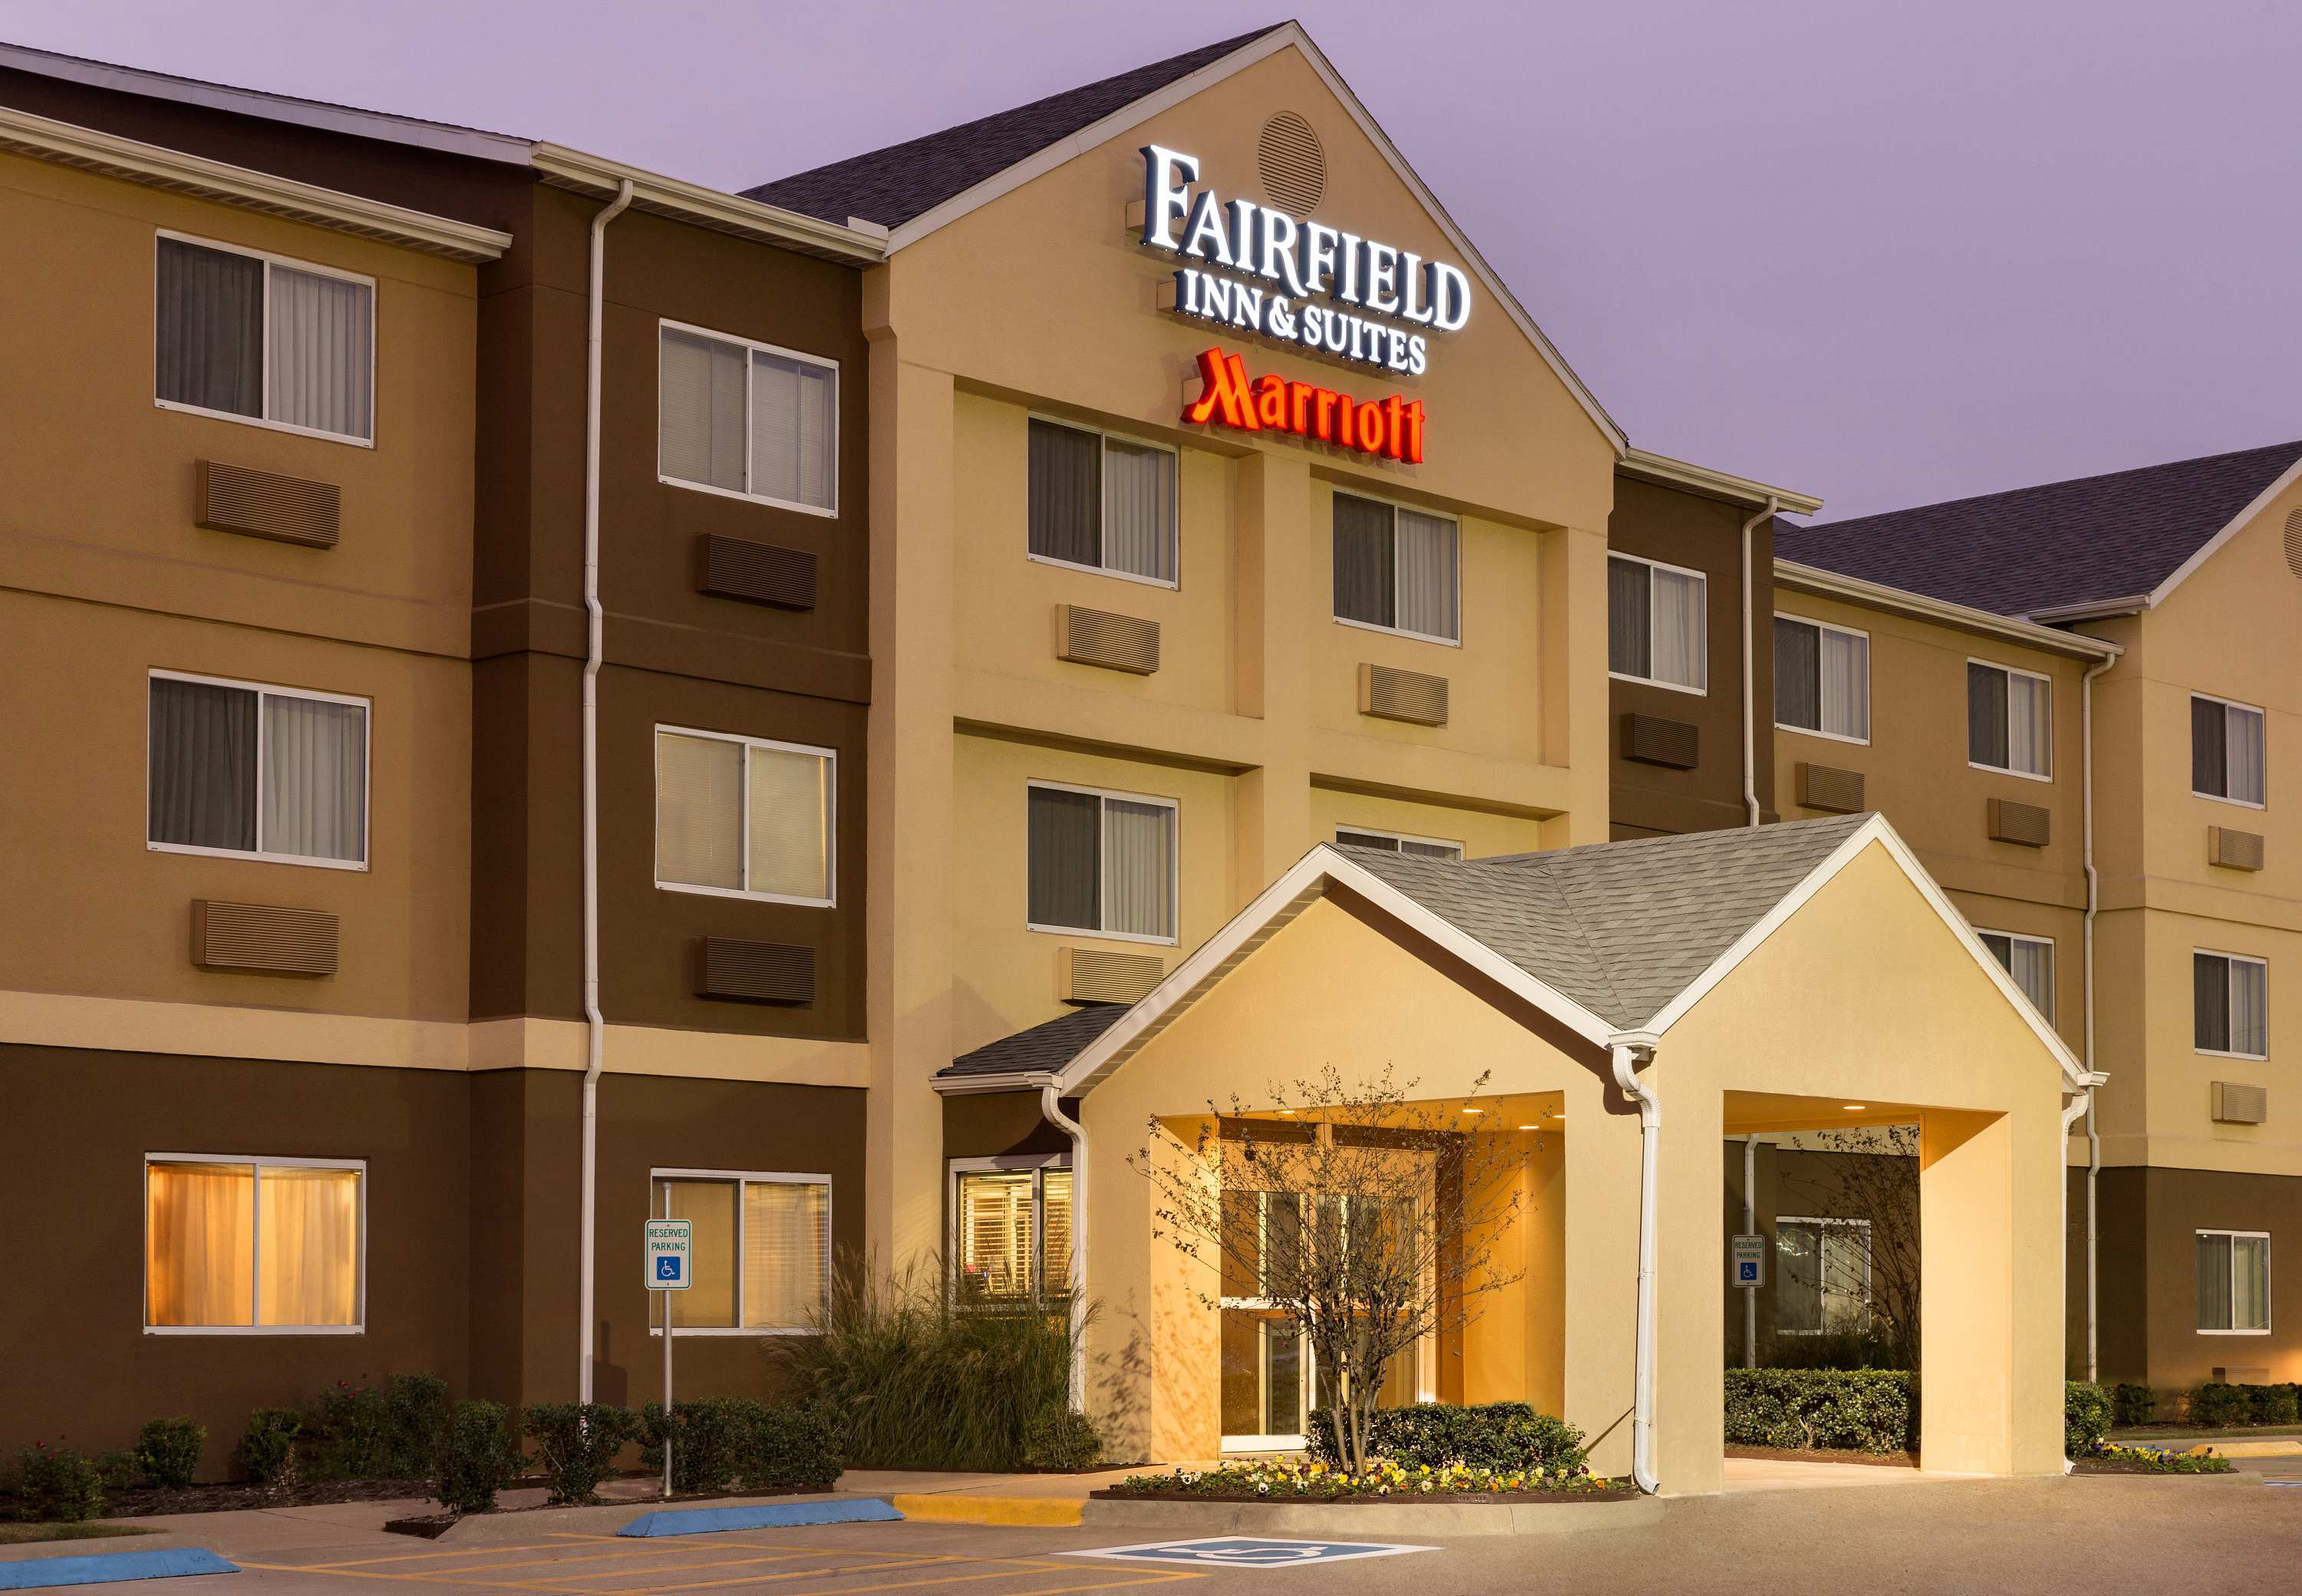 Photo of Fairfield Inn & Suites by Marriott Waco South, Woodway, TX